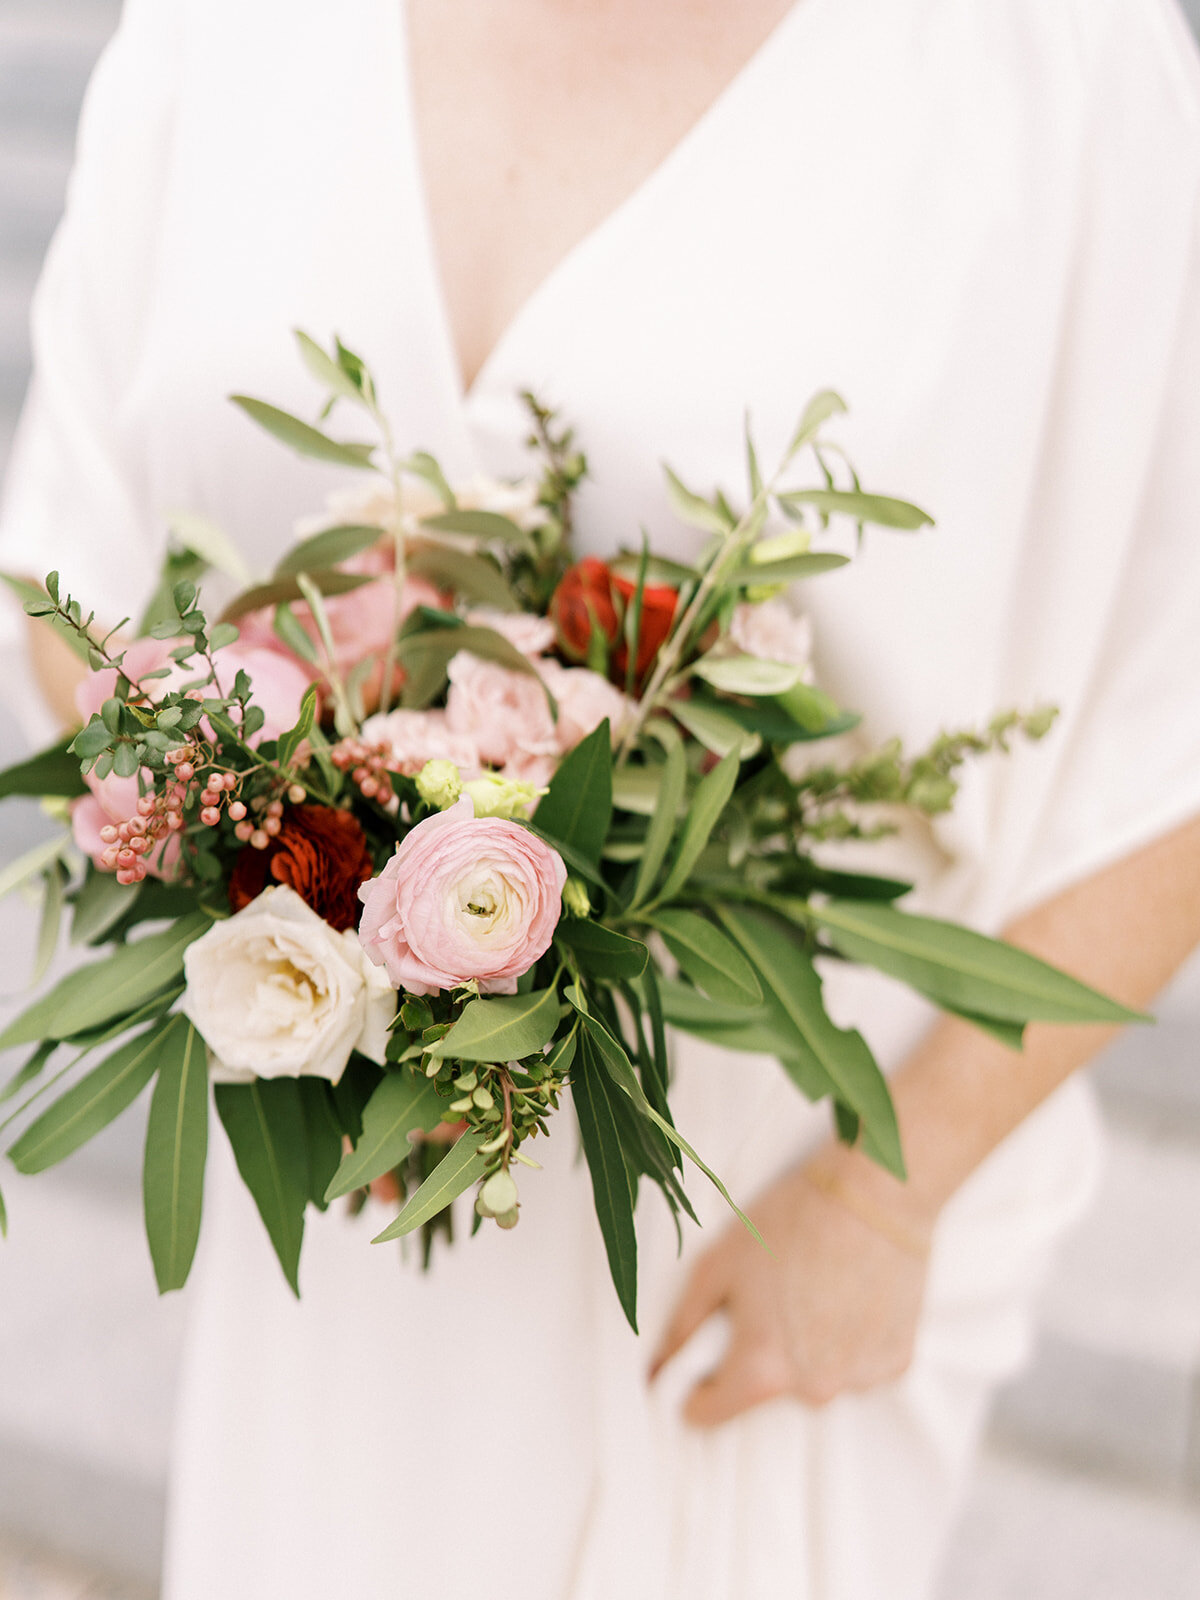 Sweet bridesmaid bouquet comprised of greenery, pinks and pops of red flowers featuring ranunculus, garden roses and pepper berry. Floral Design by Rosemary and Finch in Nashville, TN.